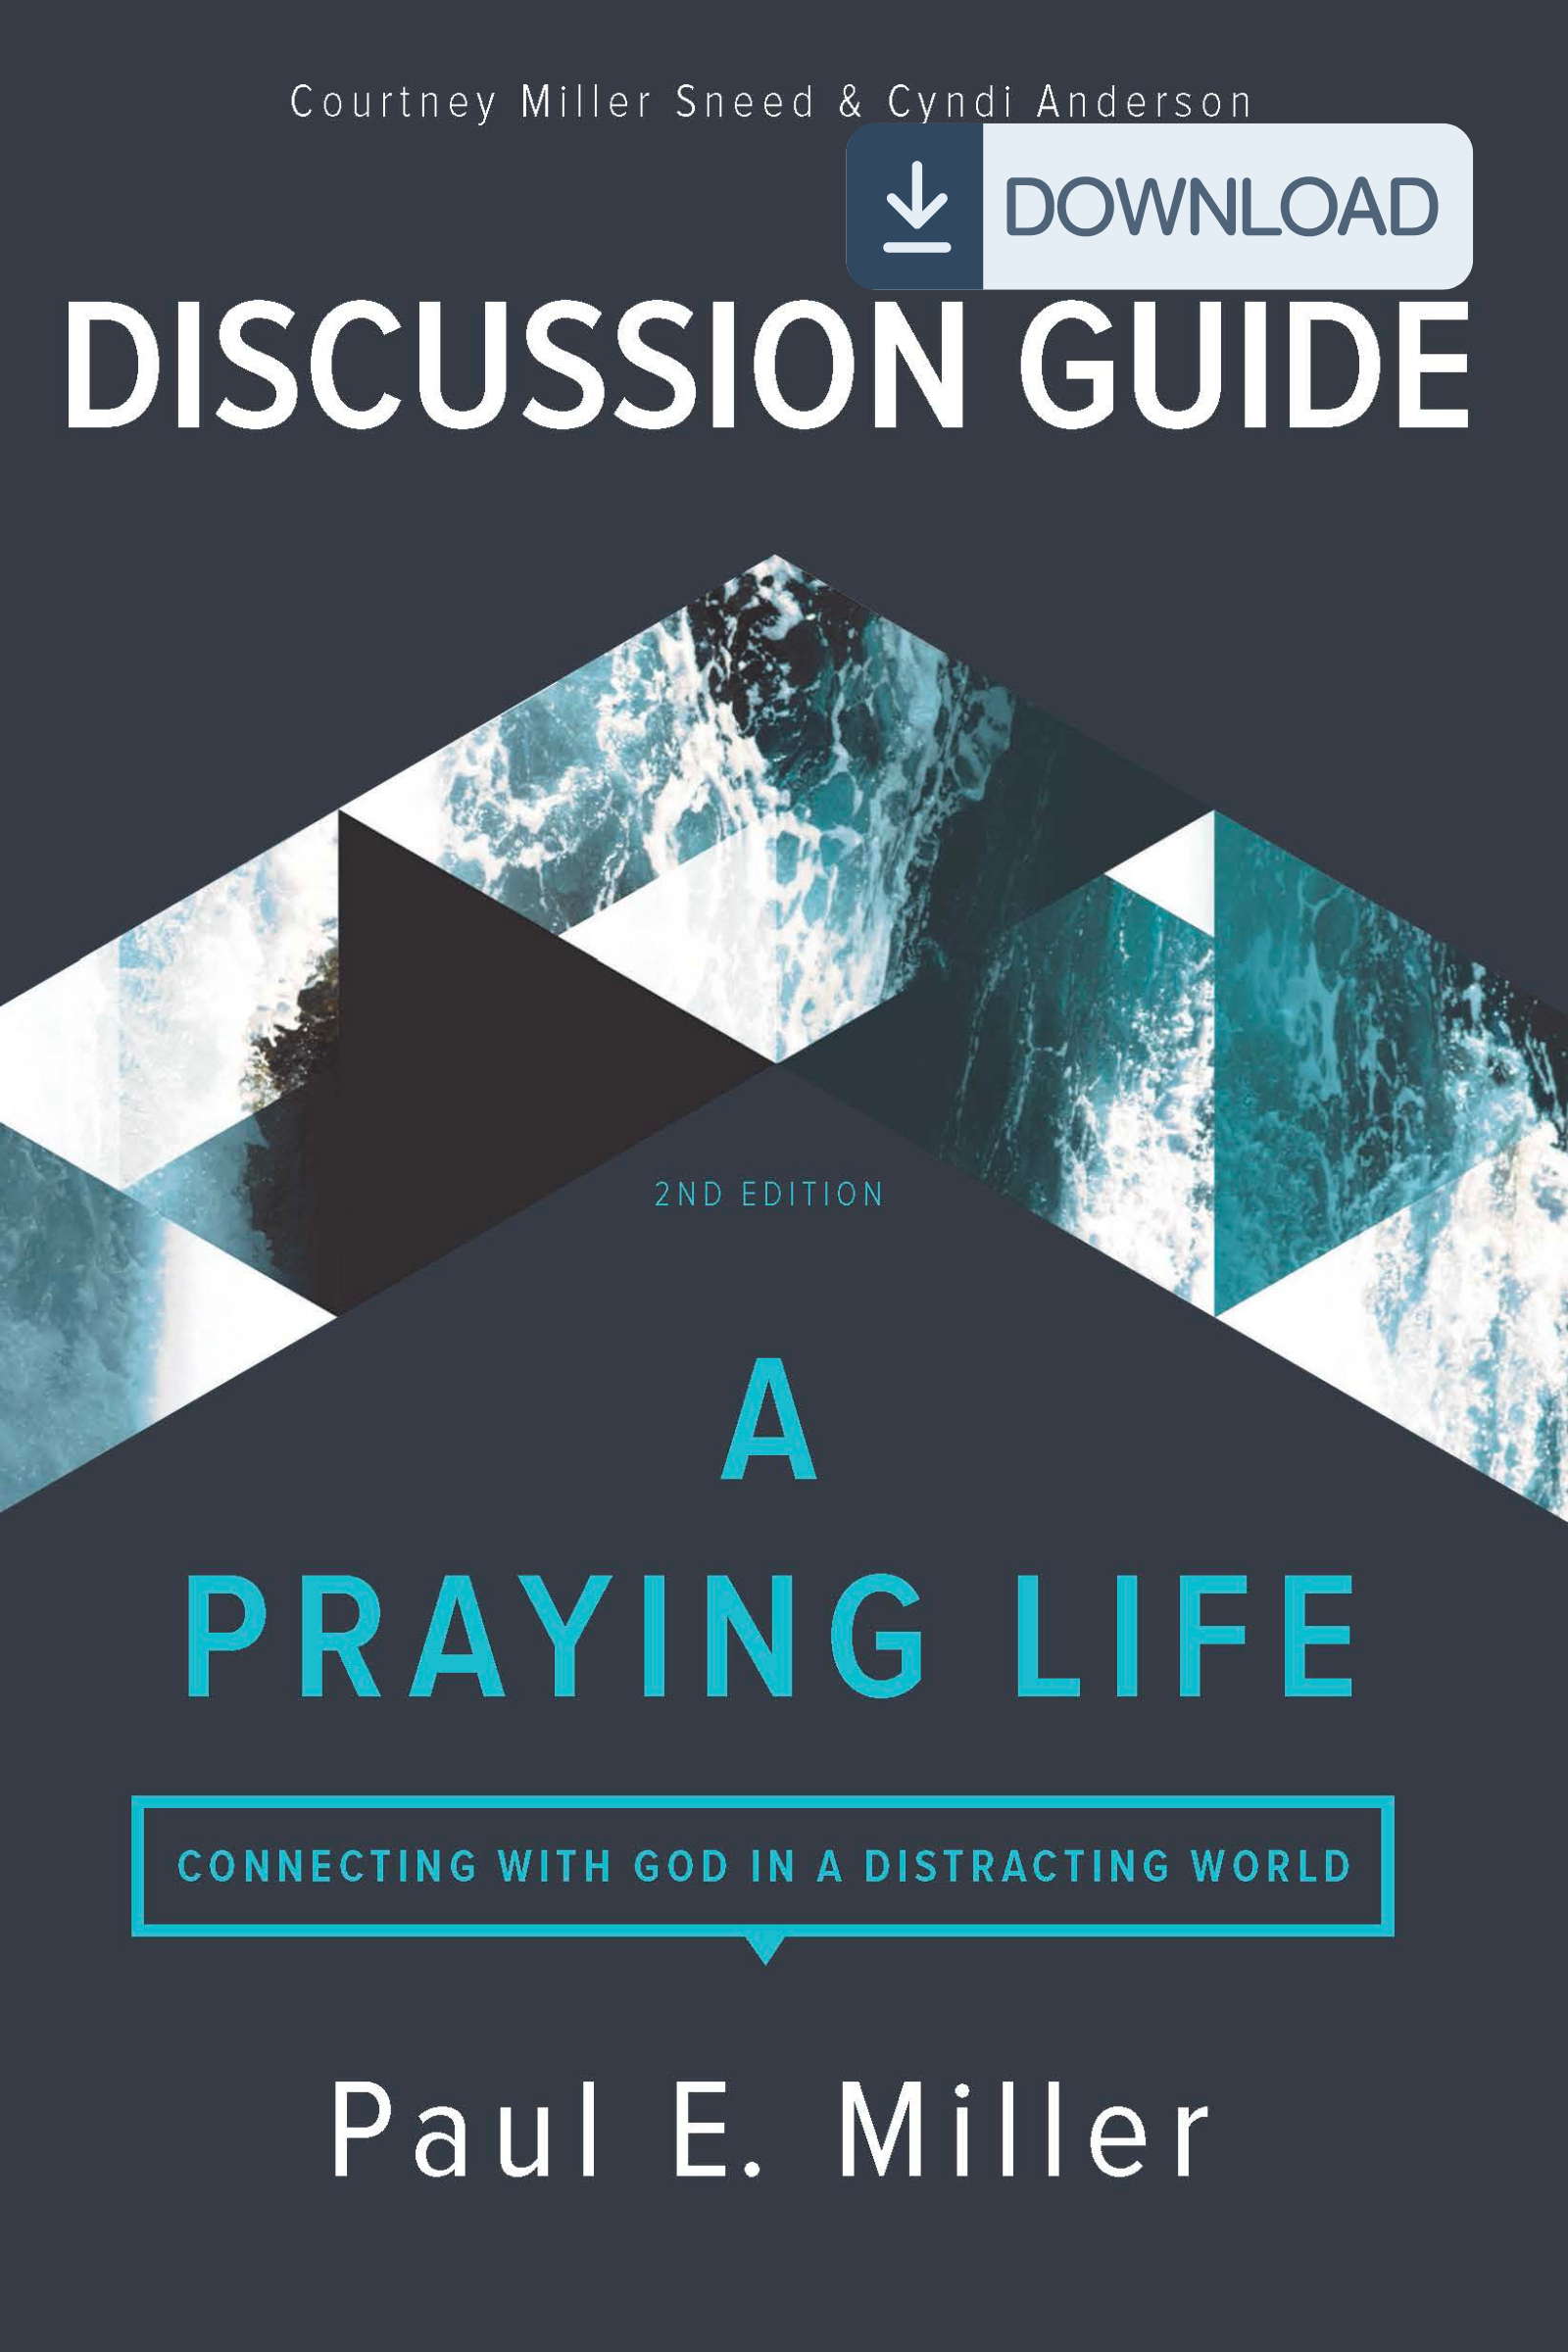 A Praying Life Discussion Guide (PDF)